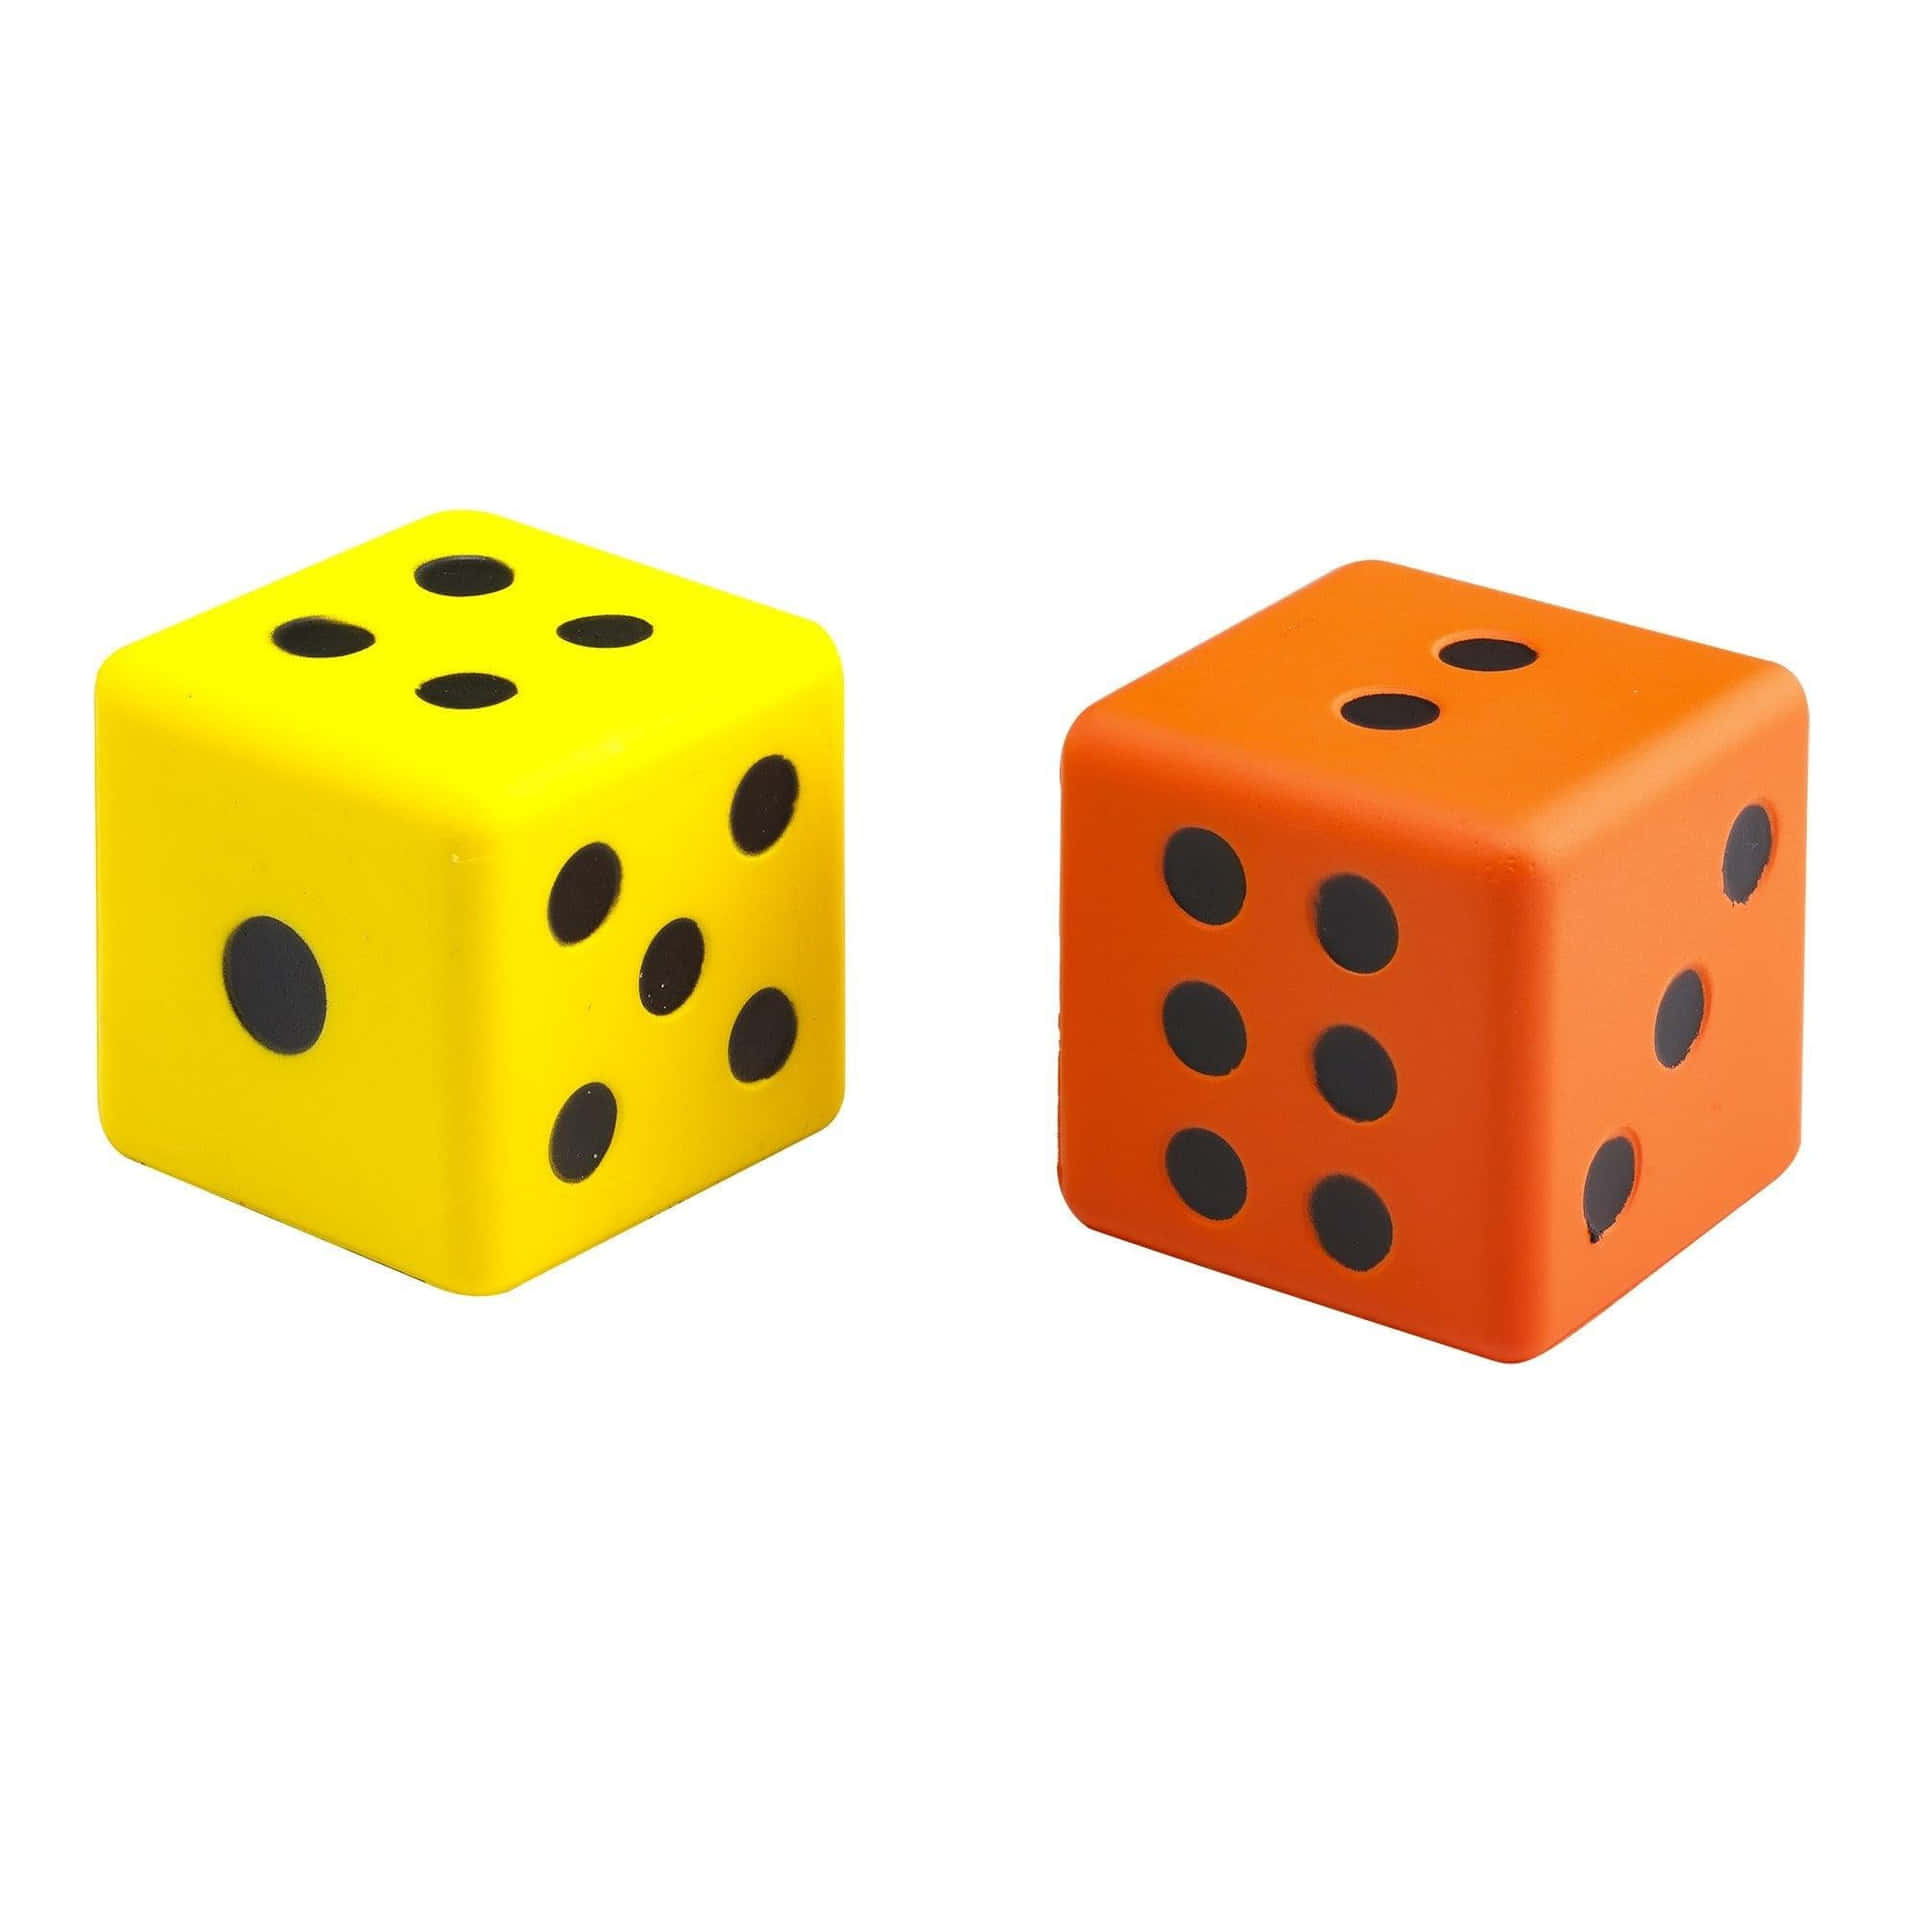 Two Dice With Black And Orange Spots